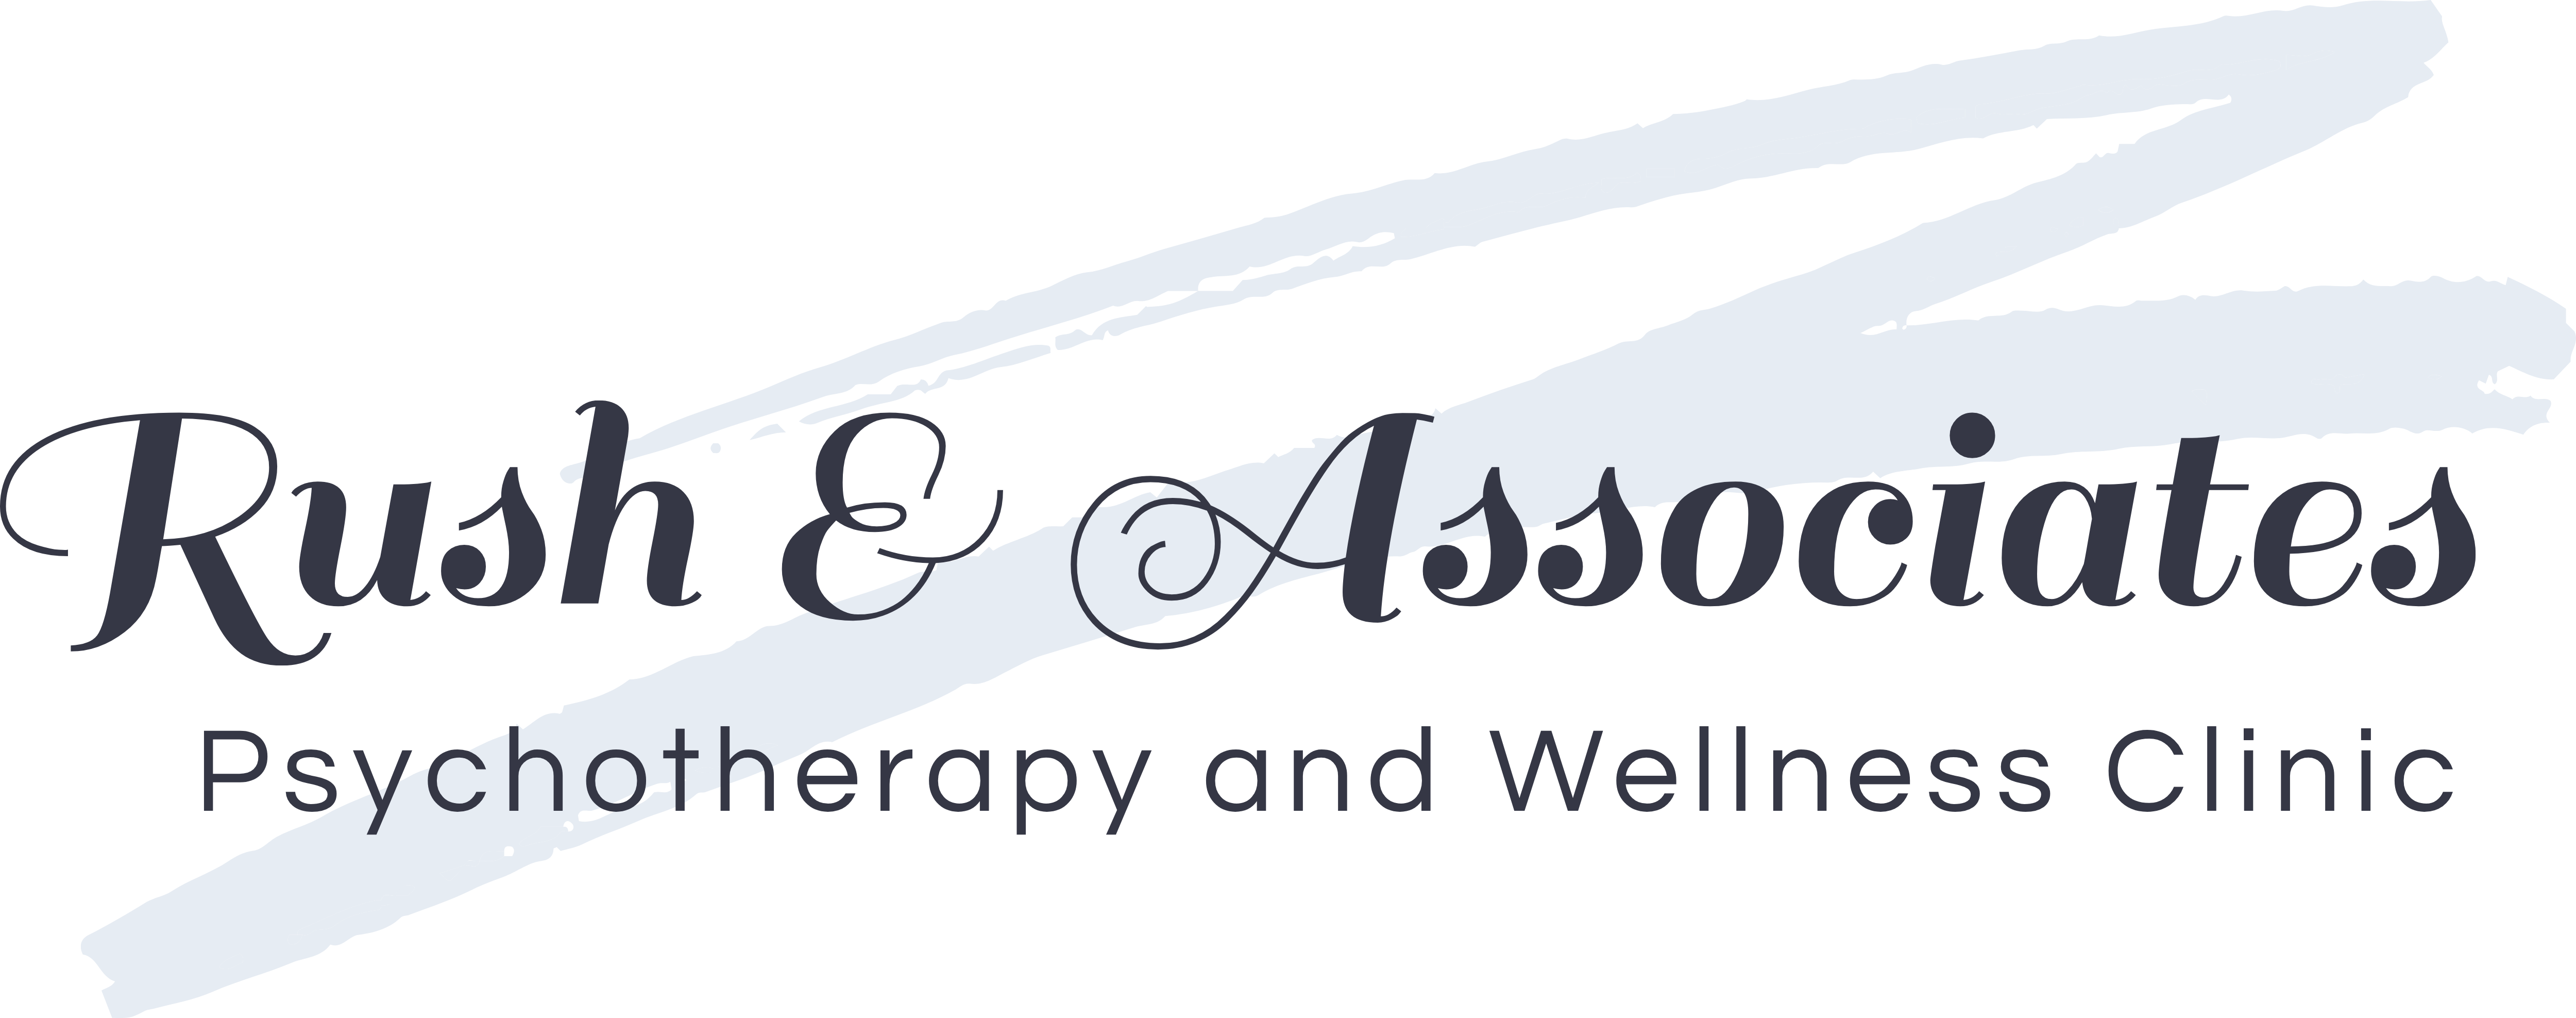 Rush & Associates Psychotherapy and Wellness